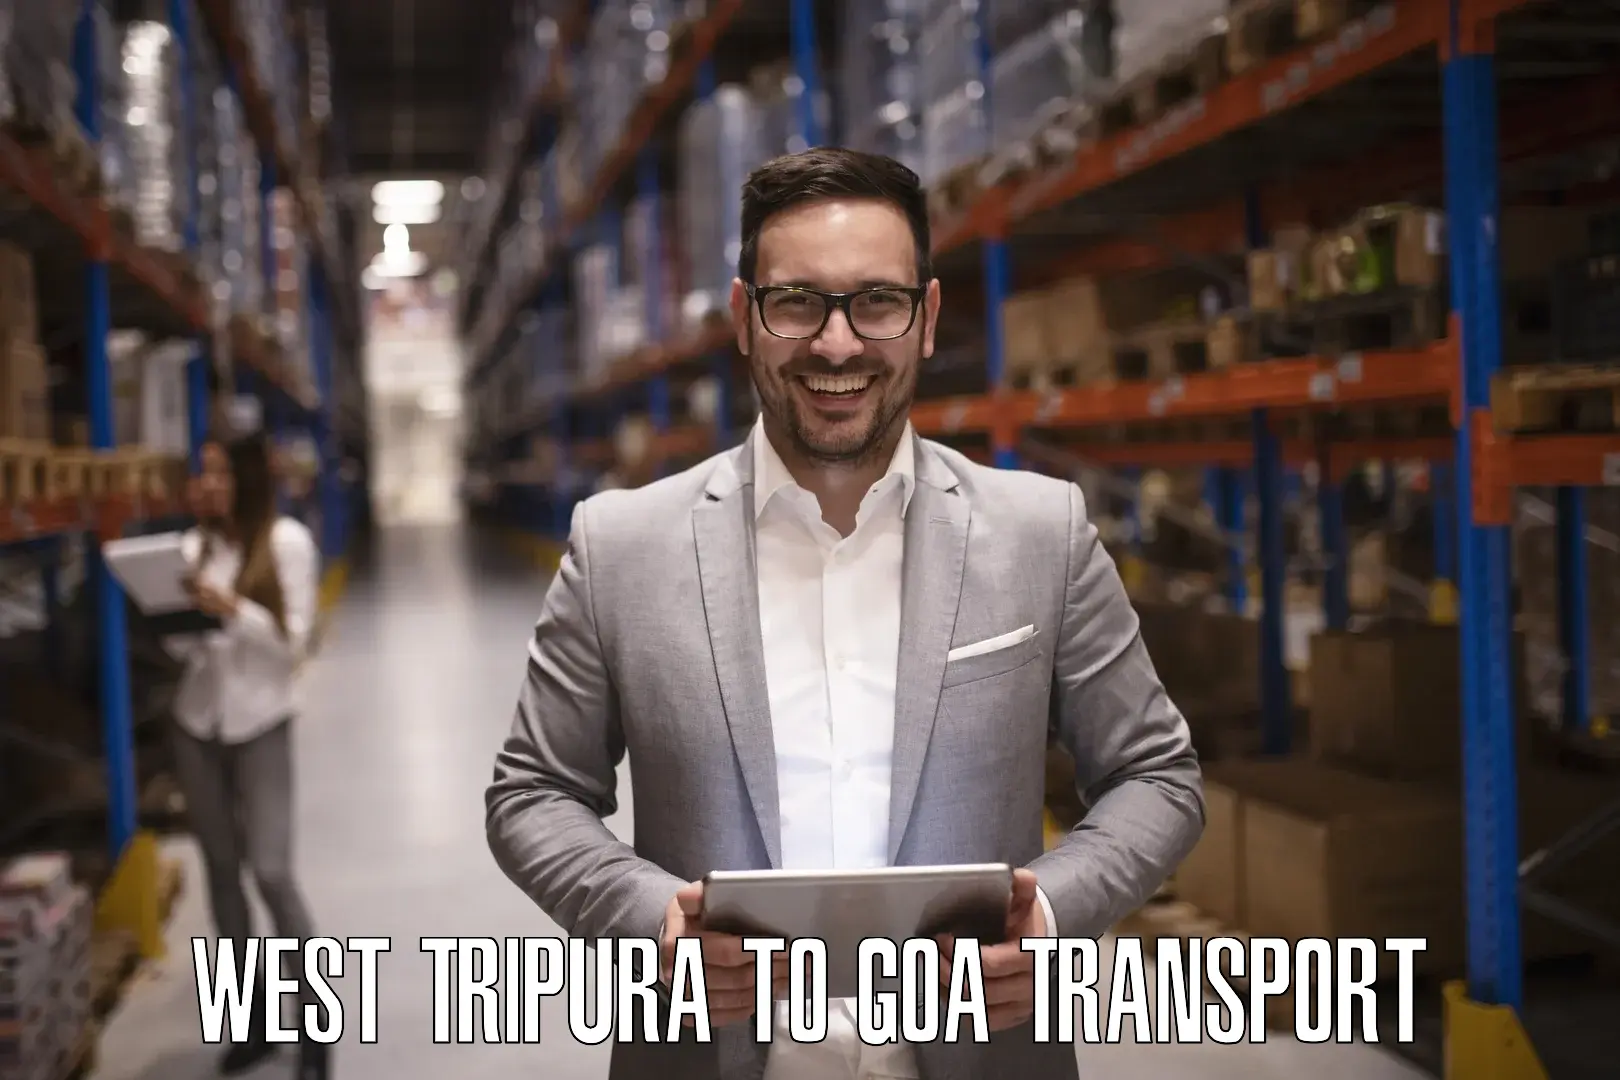 Domestic transport services West Tripura to Goa